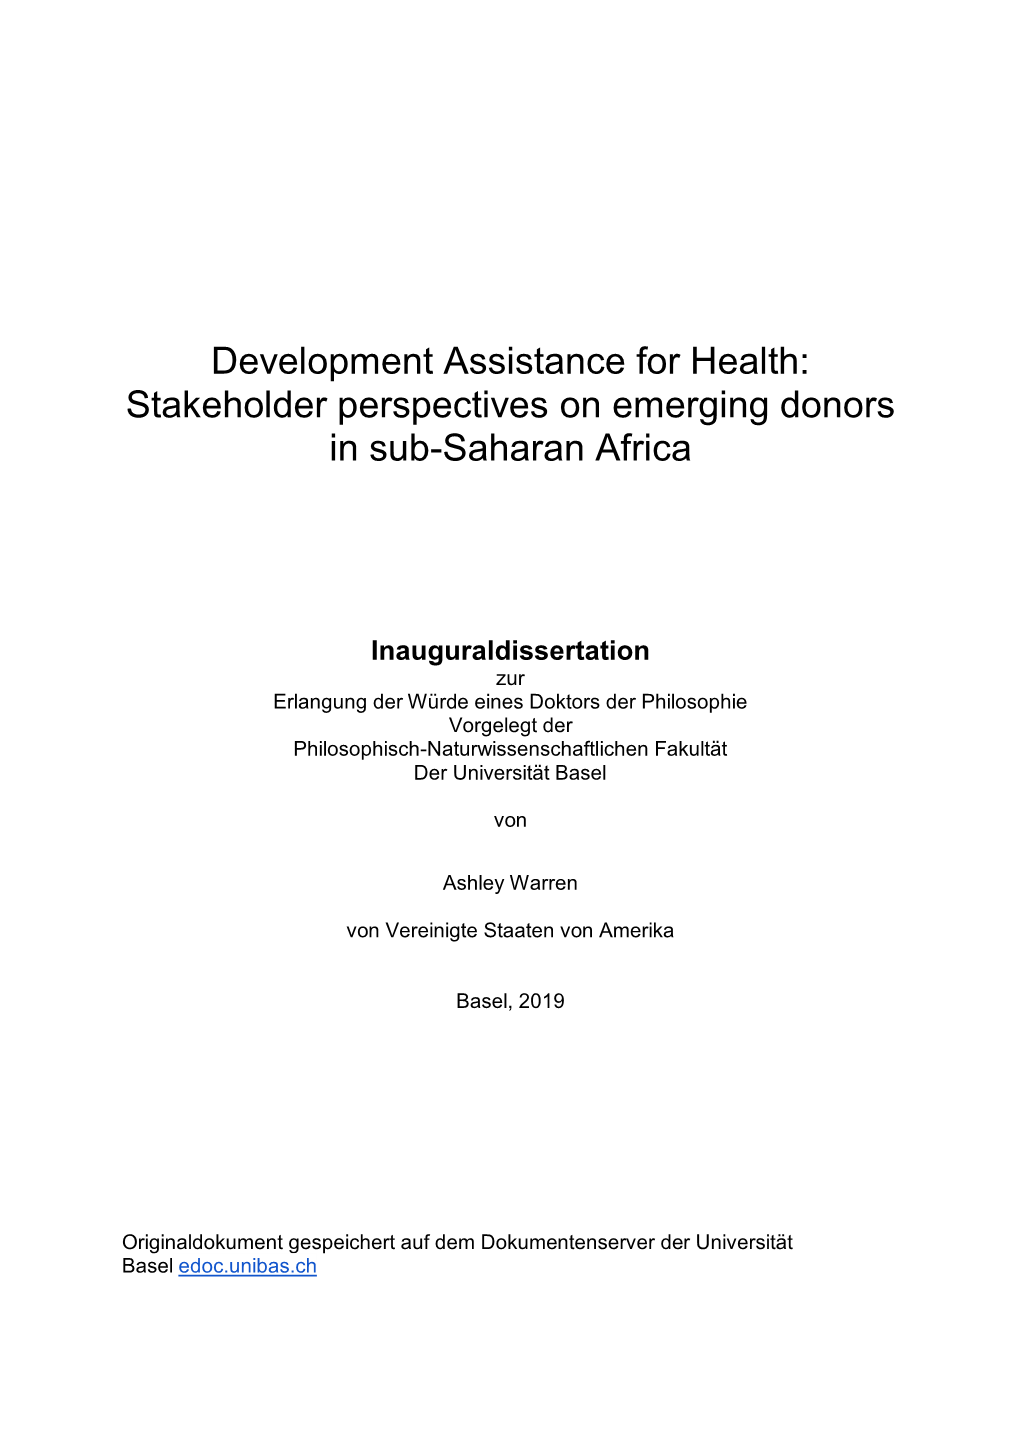 Development Assistance for Health: Stakeholder Perspectives on Emerging Donors in Sub-Saharan Africa